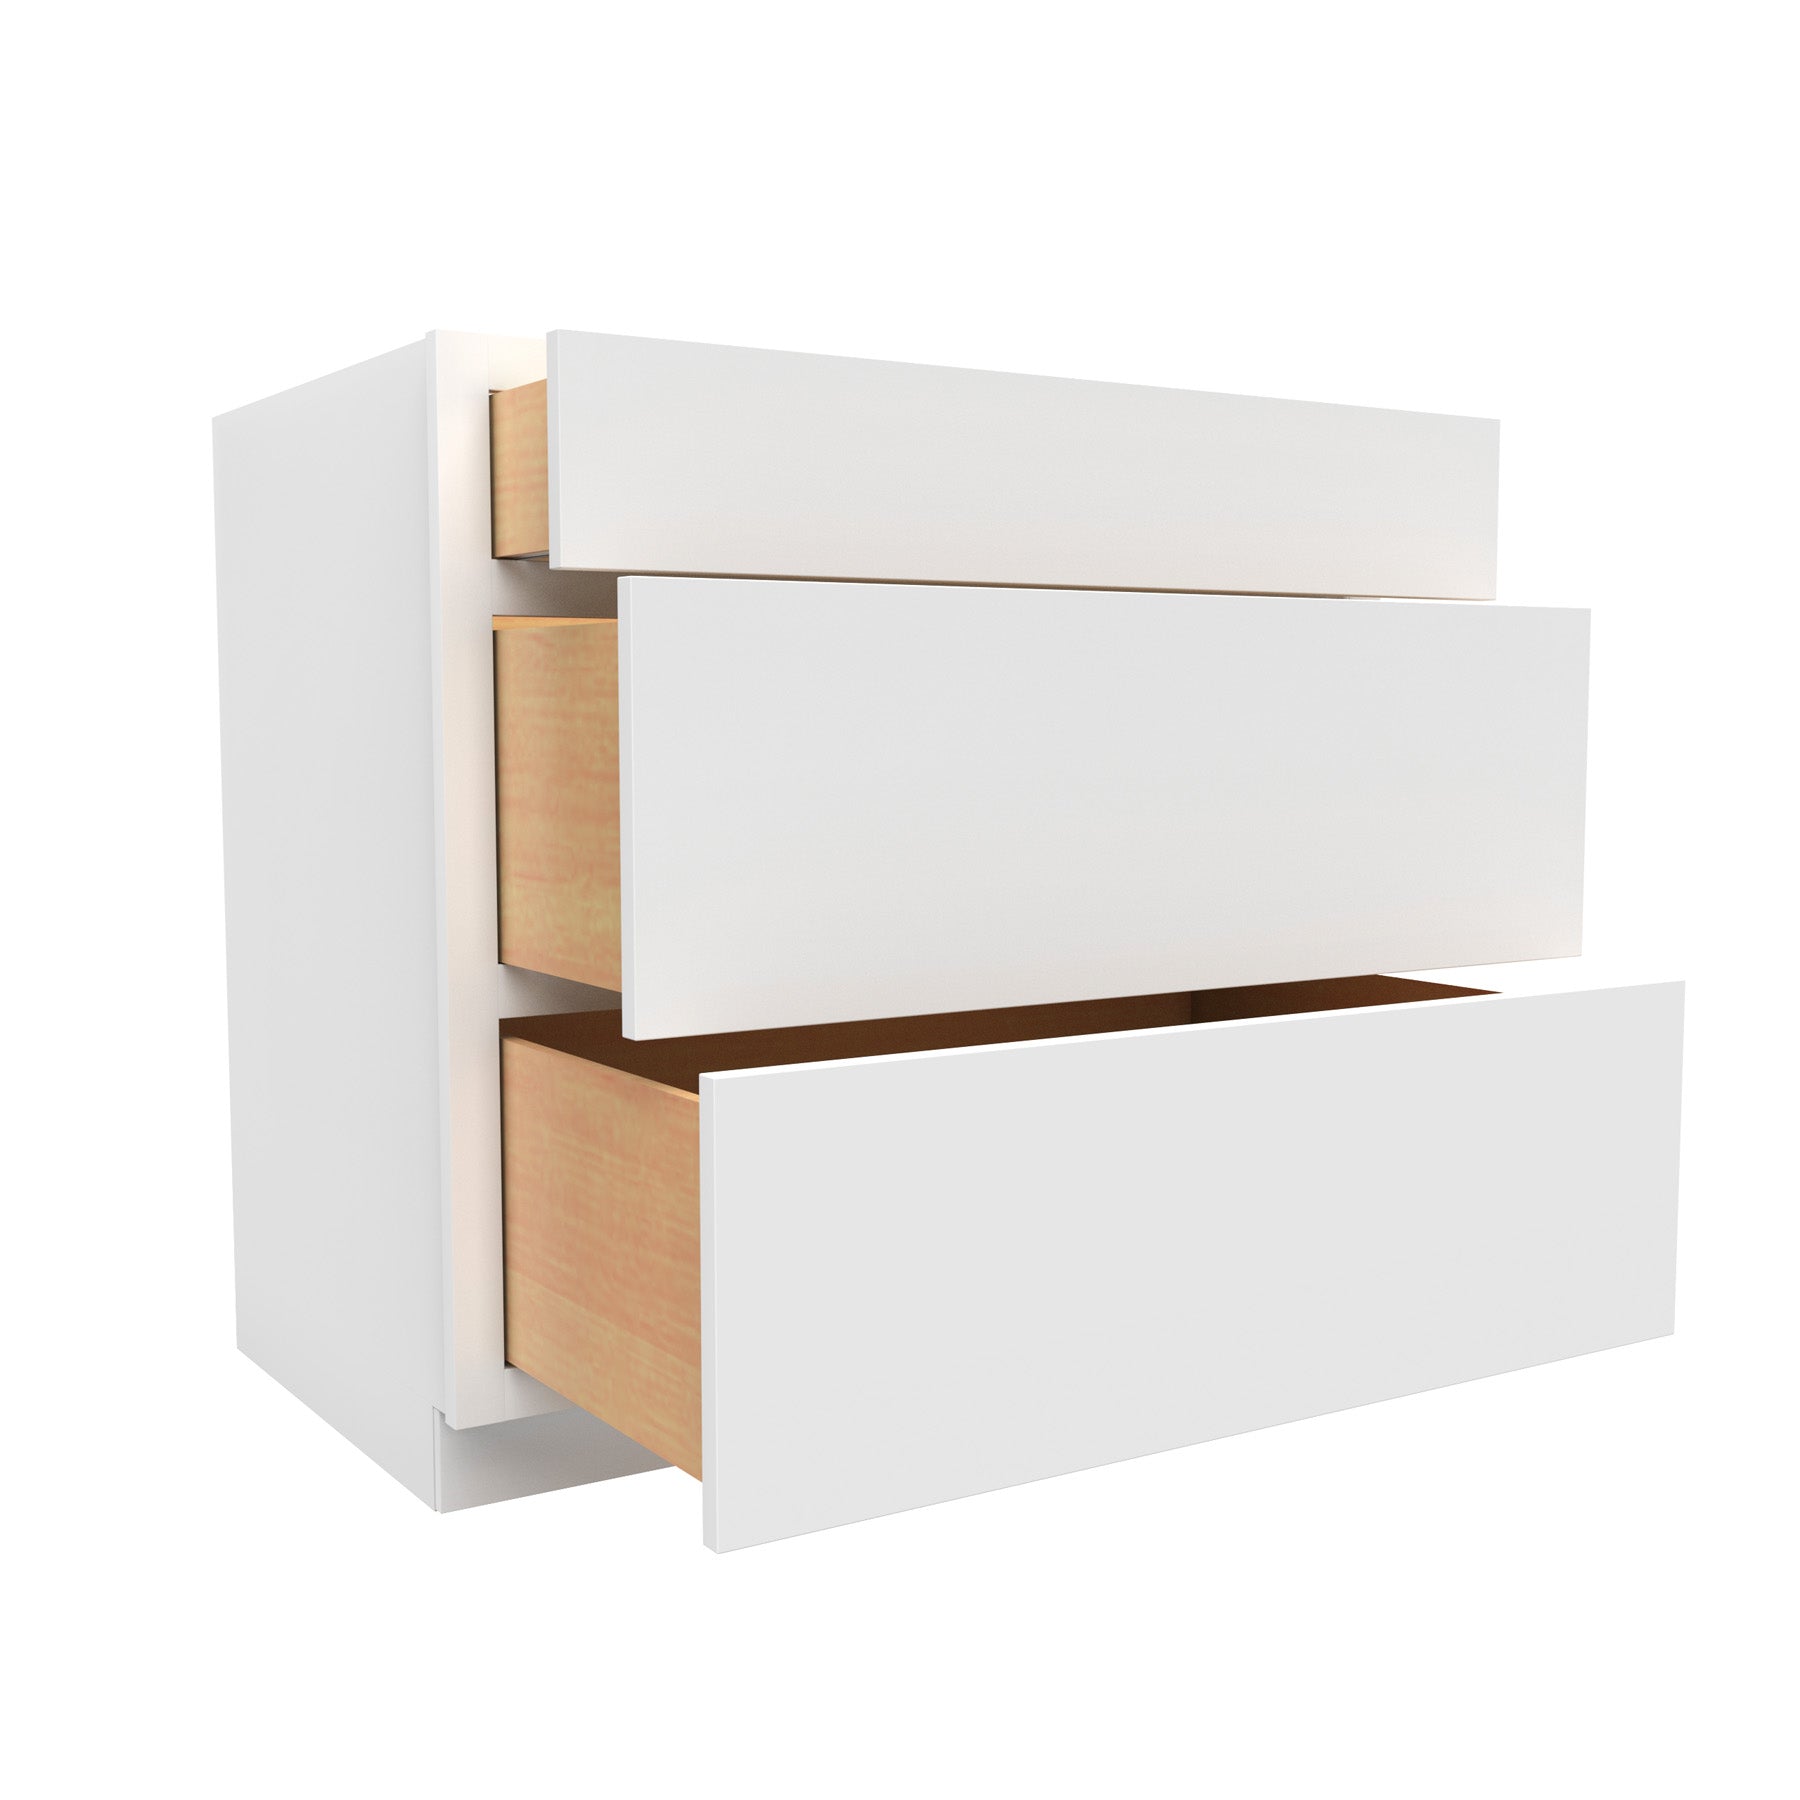 36 Inch Wide 3 Drawer Base Cabinet - Luxor White Shaker - Ready To Assemble, 36"W x 34.5"H x 24"D